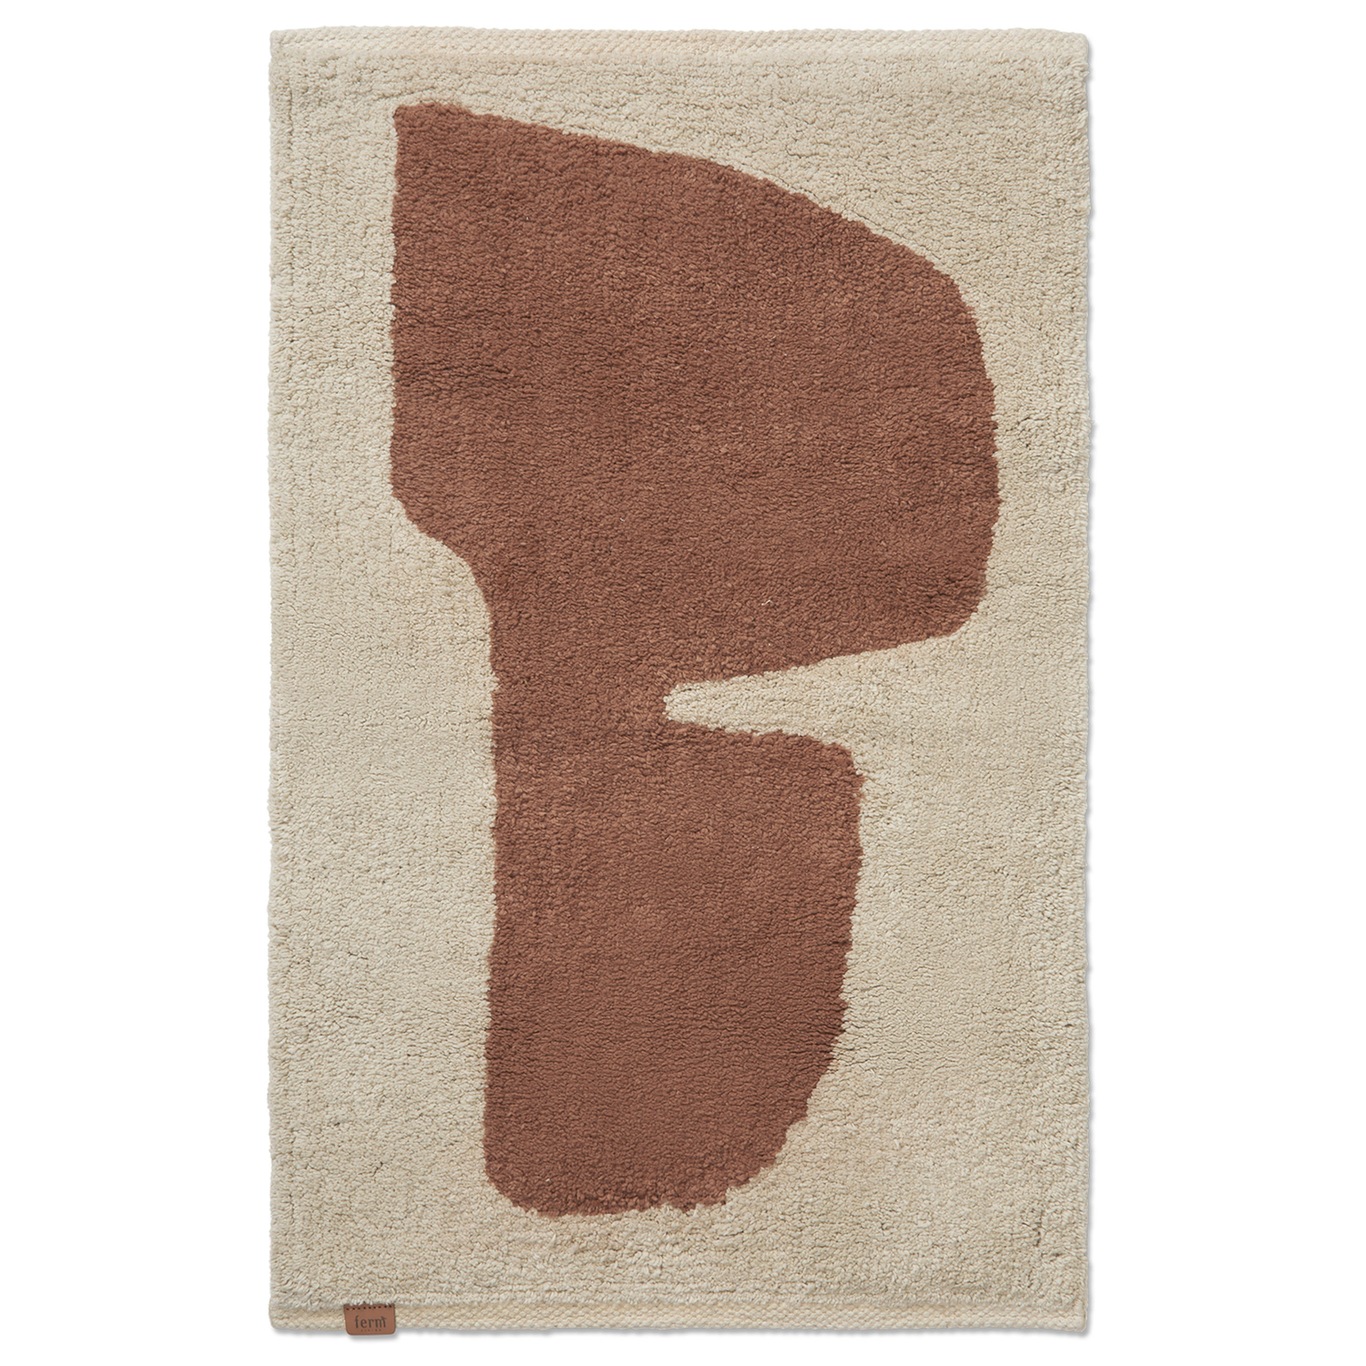 Lay Washable Rug 50x70 cm, Parchment/Rust